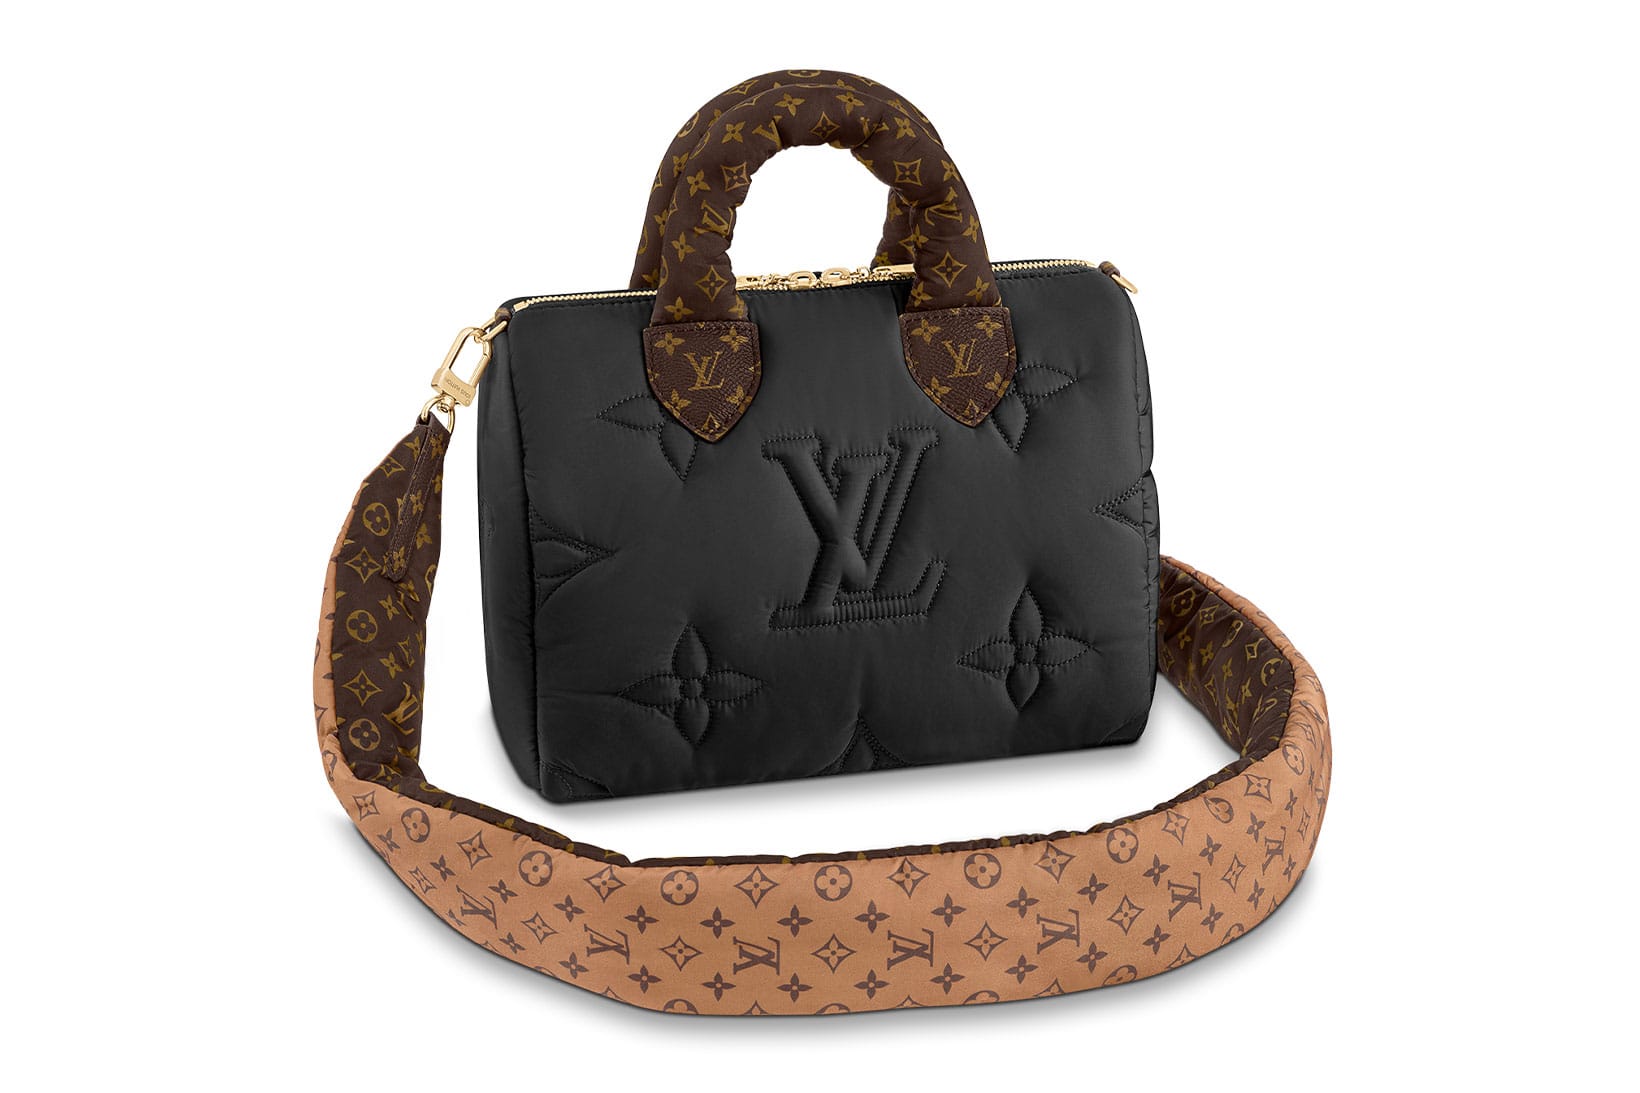 LOUIS VUITTON 101: GUIDE TO LEATHERS & MORE | Bag Religion